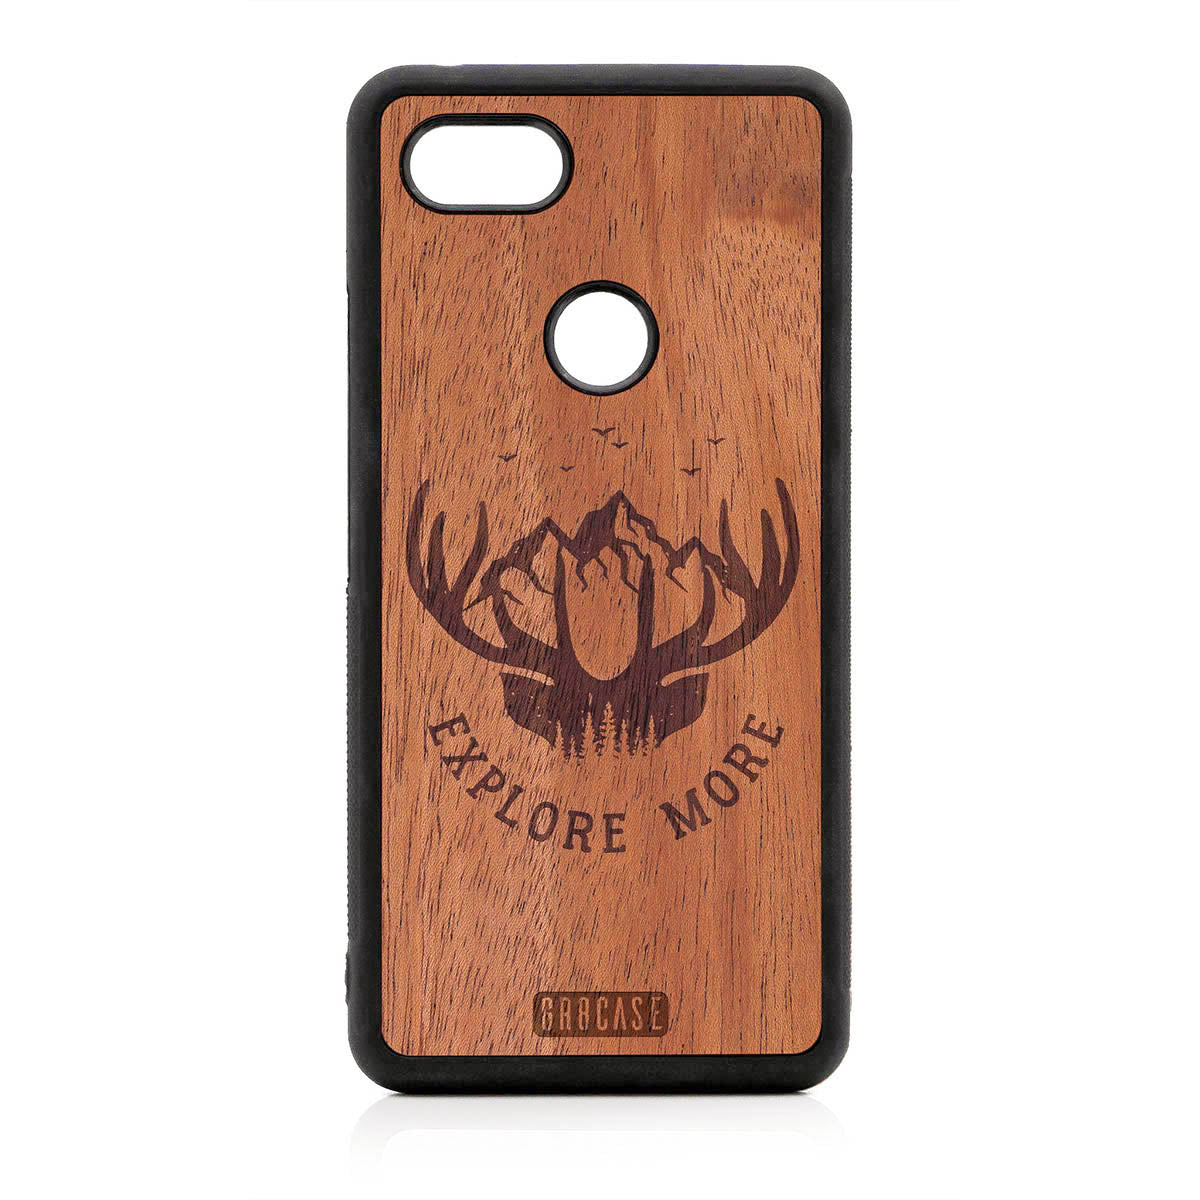 Explore More (Forest, Mountains & Antlers) Design Wood Case For Google Pixel 3 XL by GR8CASE